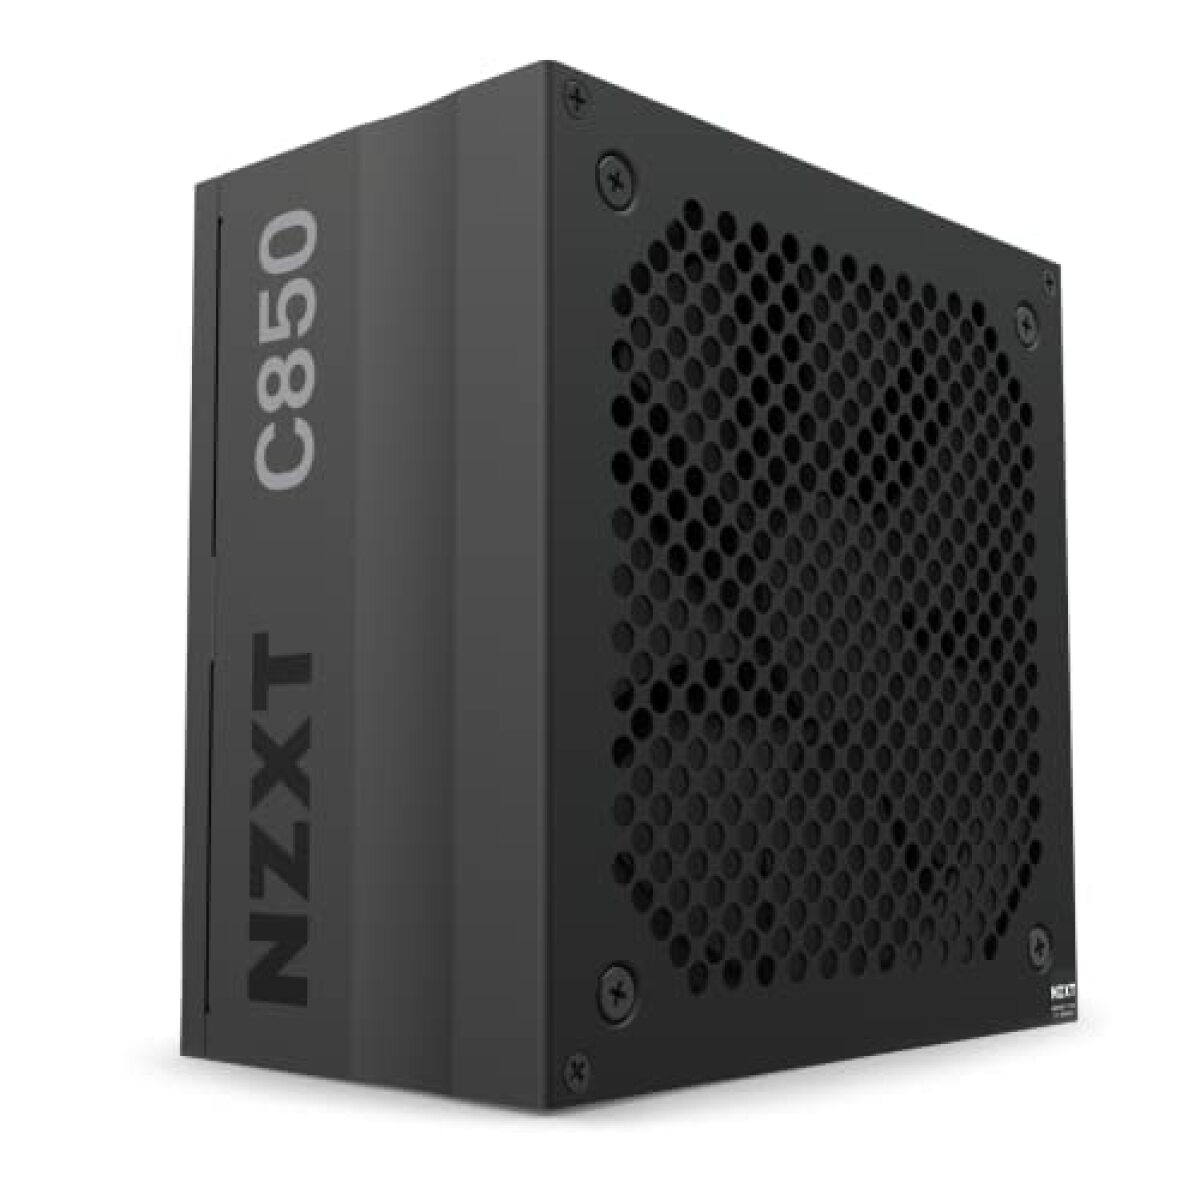 Alimentation modulaire Nzxt C850 80+ Gold 850W